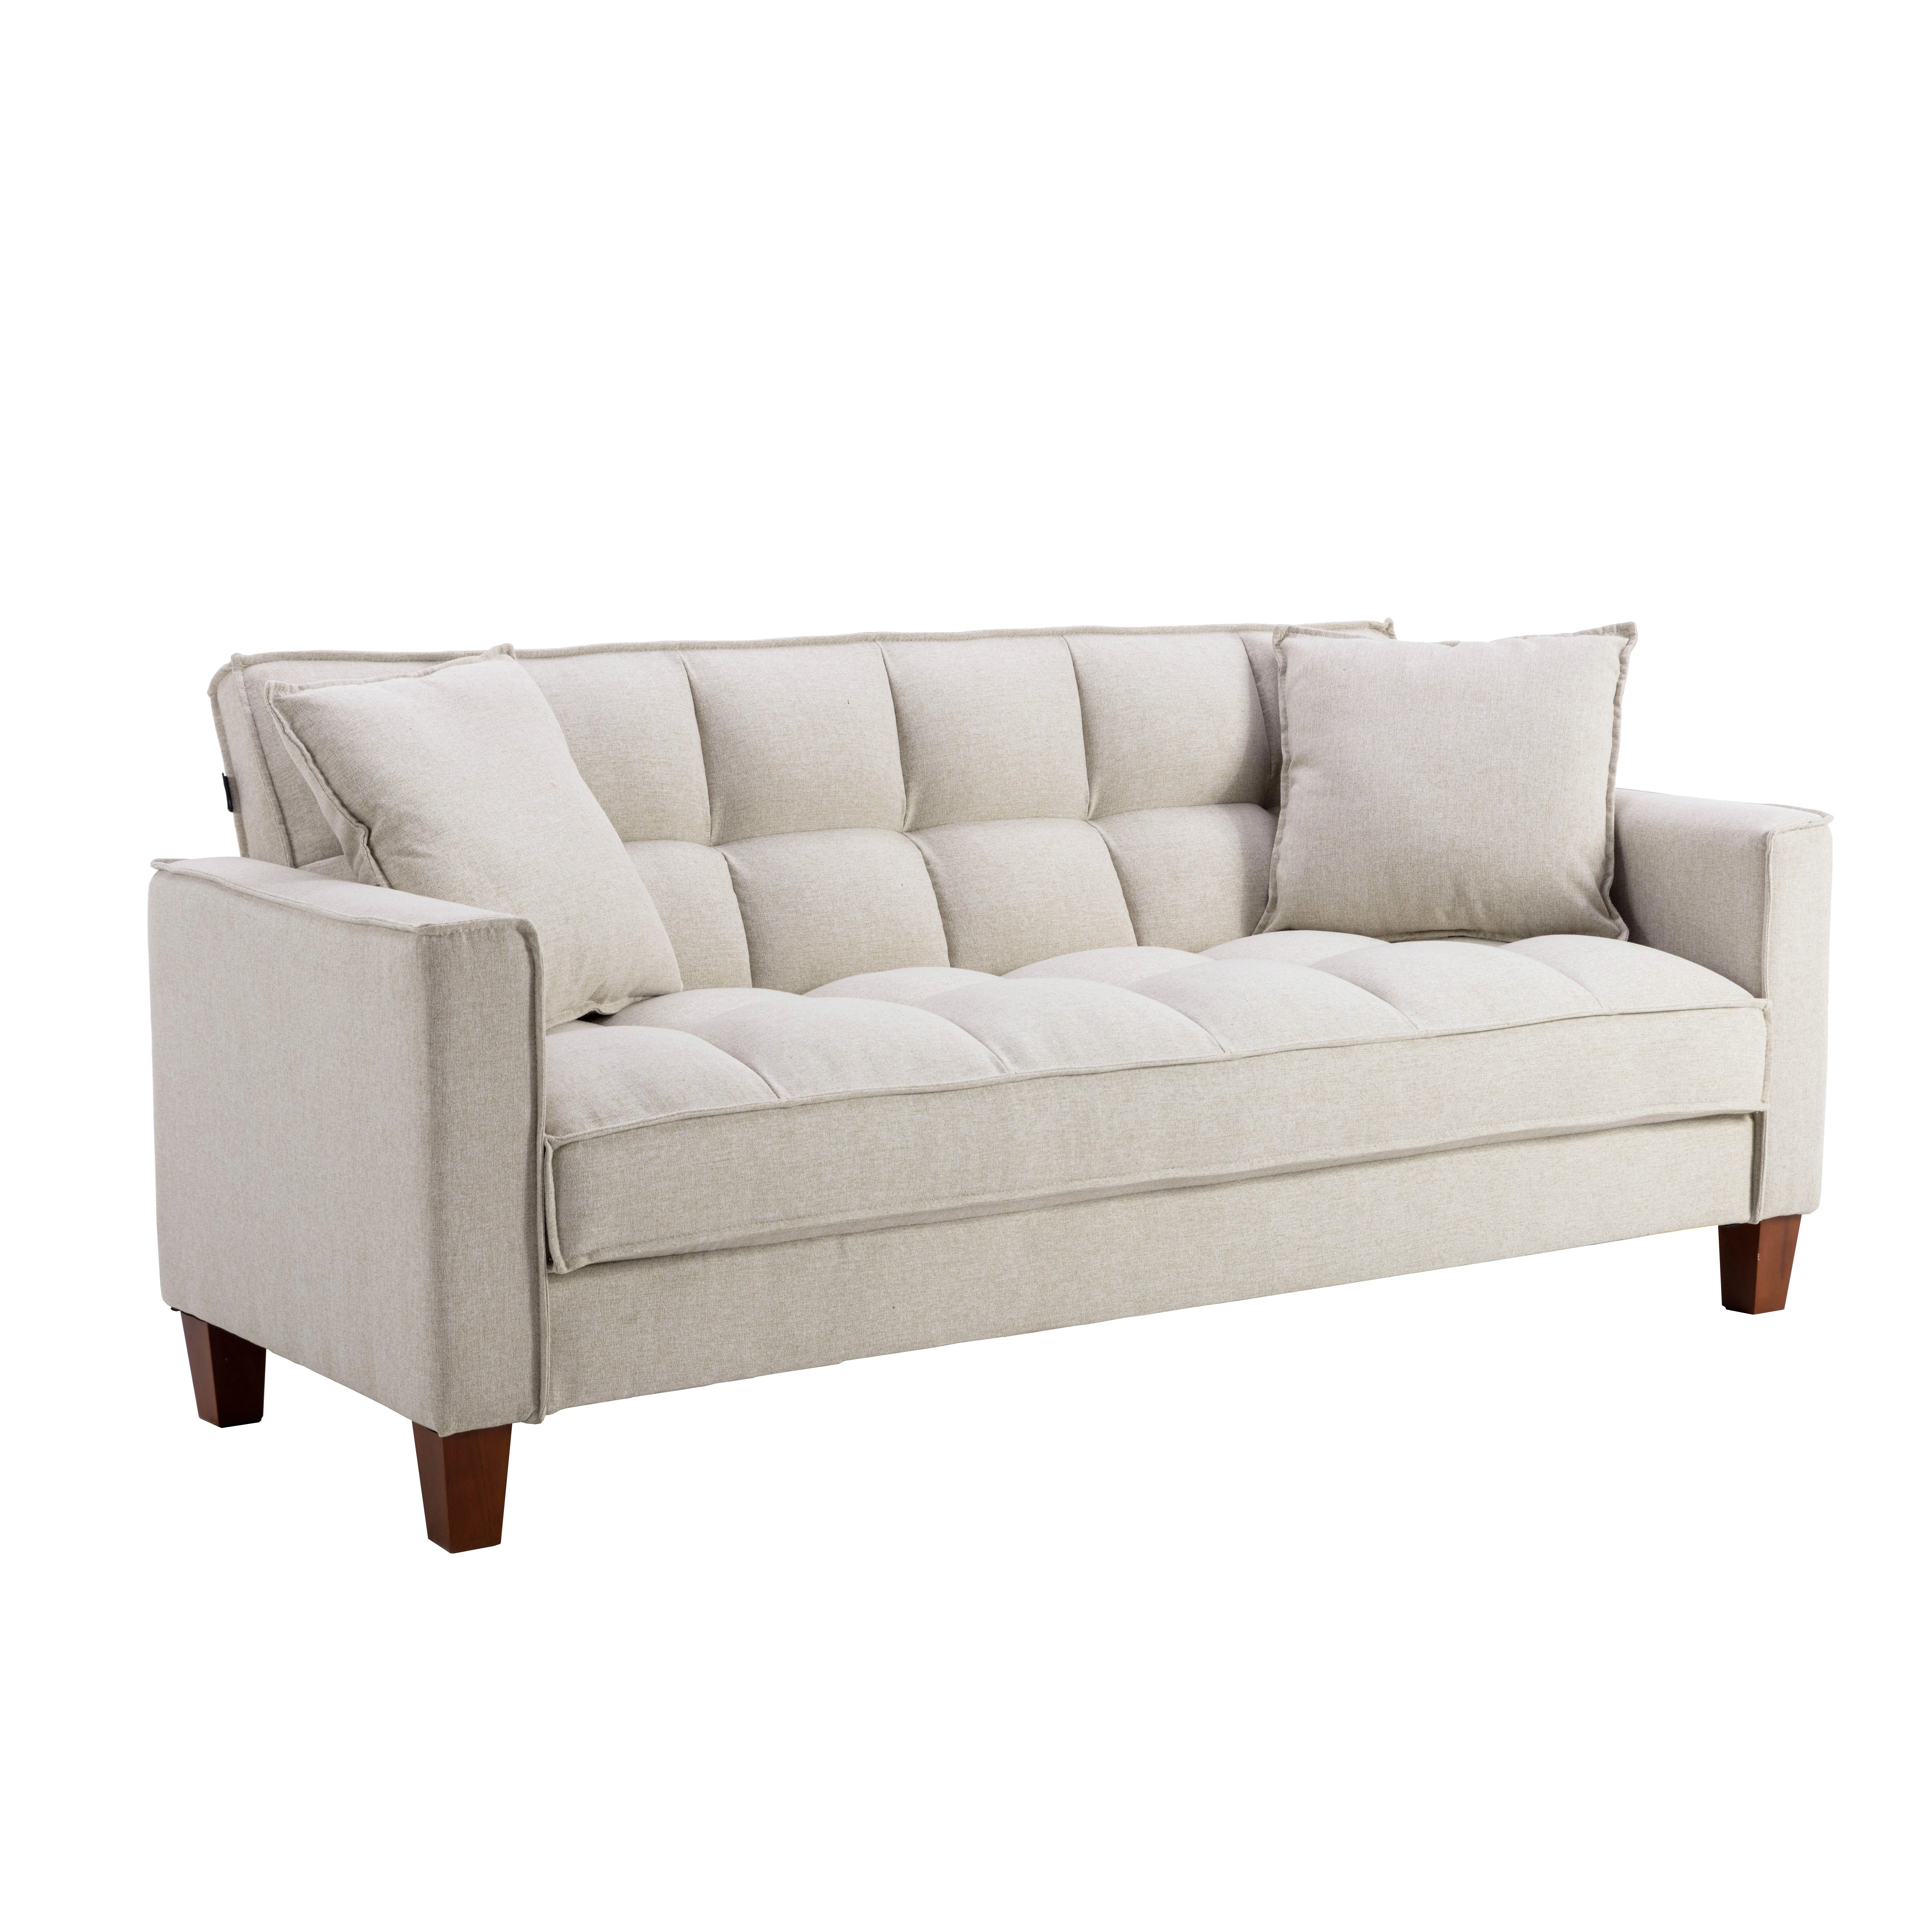 hot selling solid color sofa easy assemble 2 seater furniture breathable linen sofa stool,beige